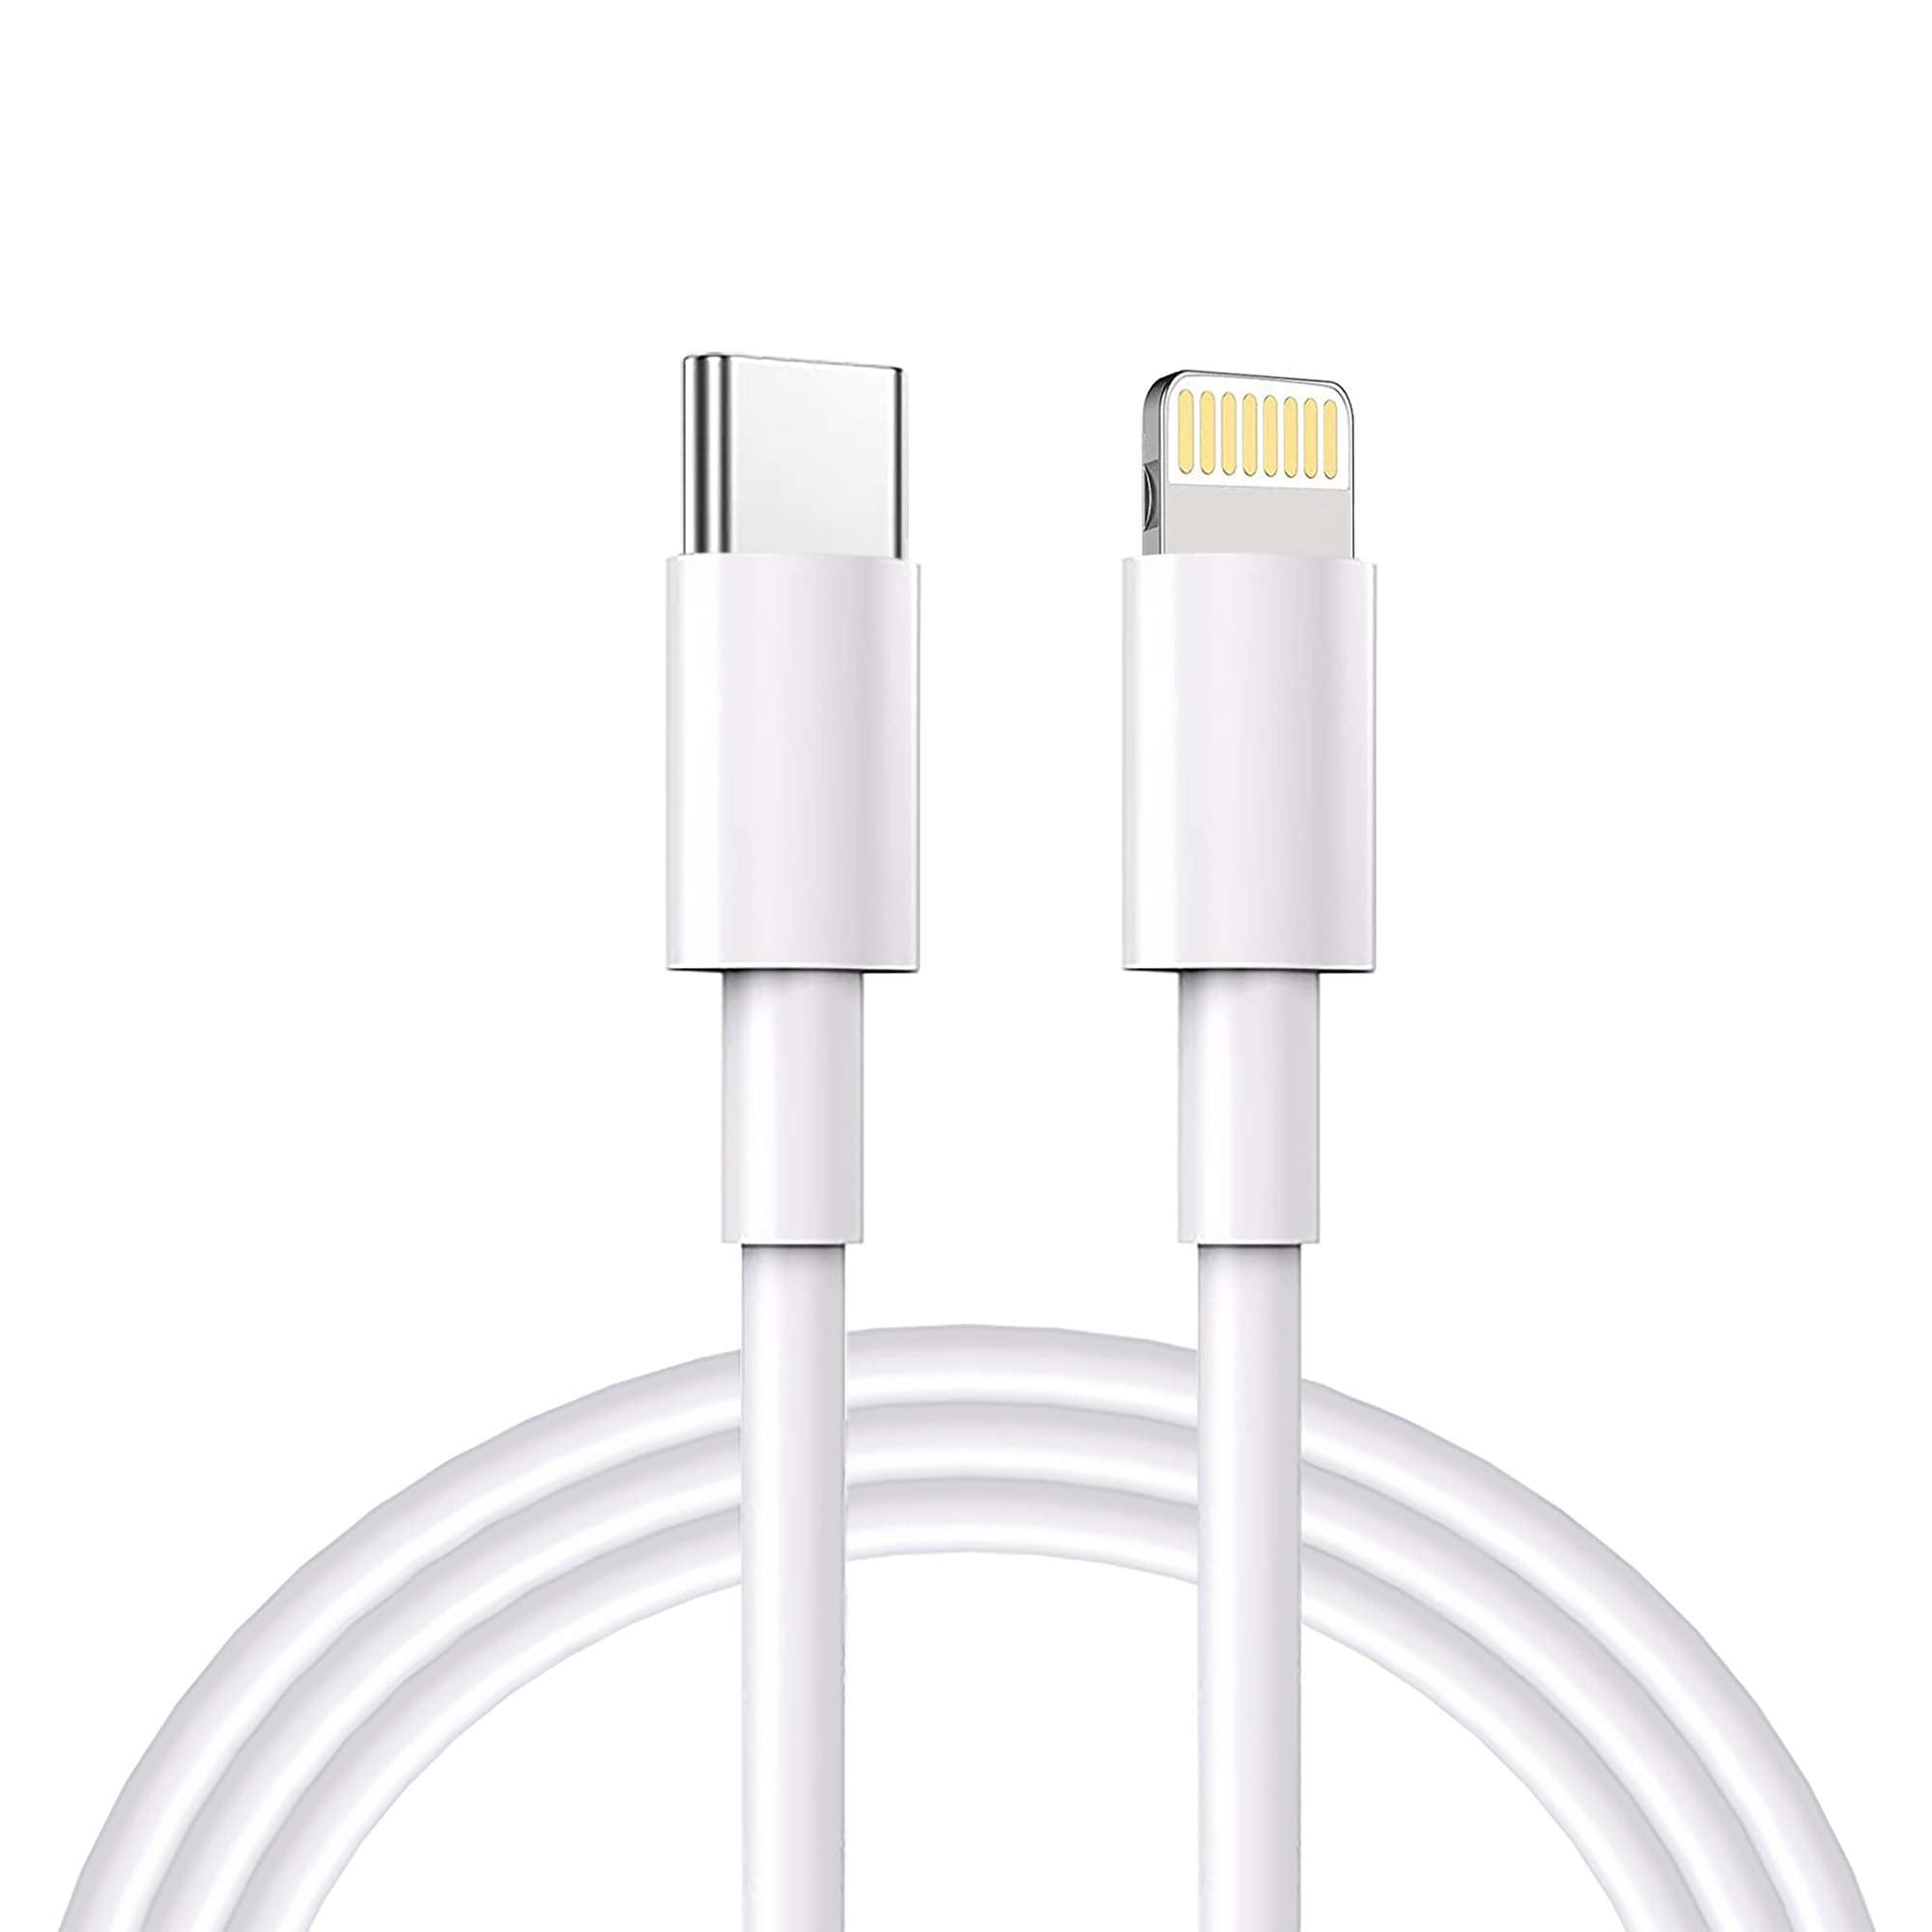 USB connecting cable compatible with iPhone and USB-C 1 meter - DEVCOline